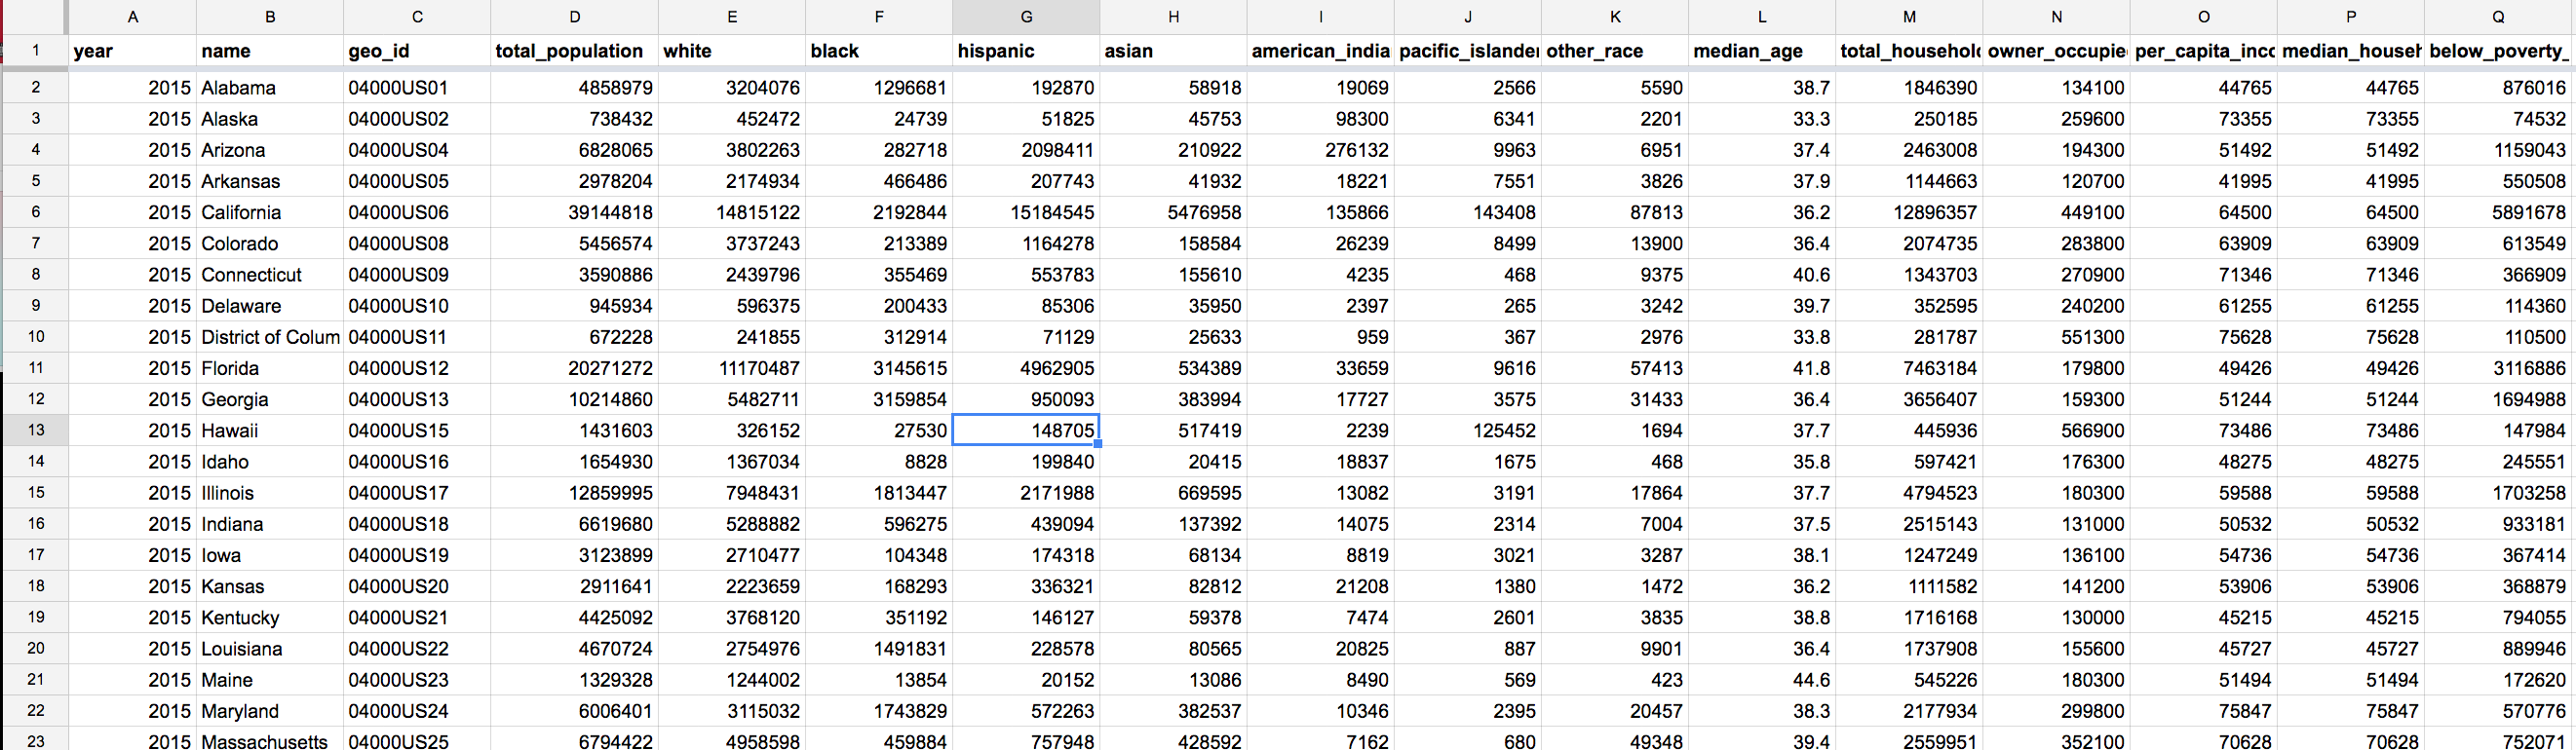 acs-spreadsheet-states-page-preview.png